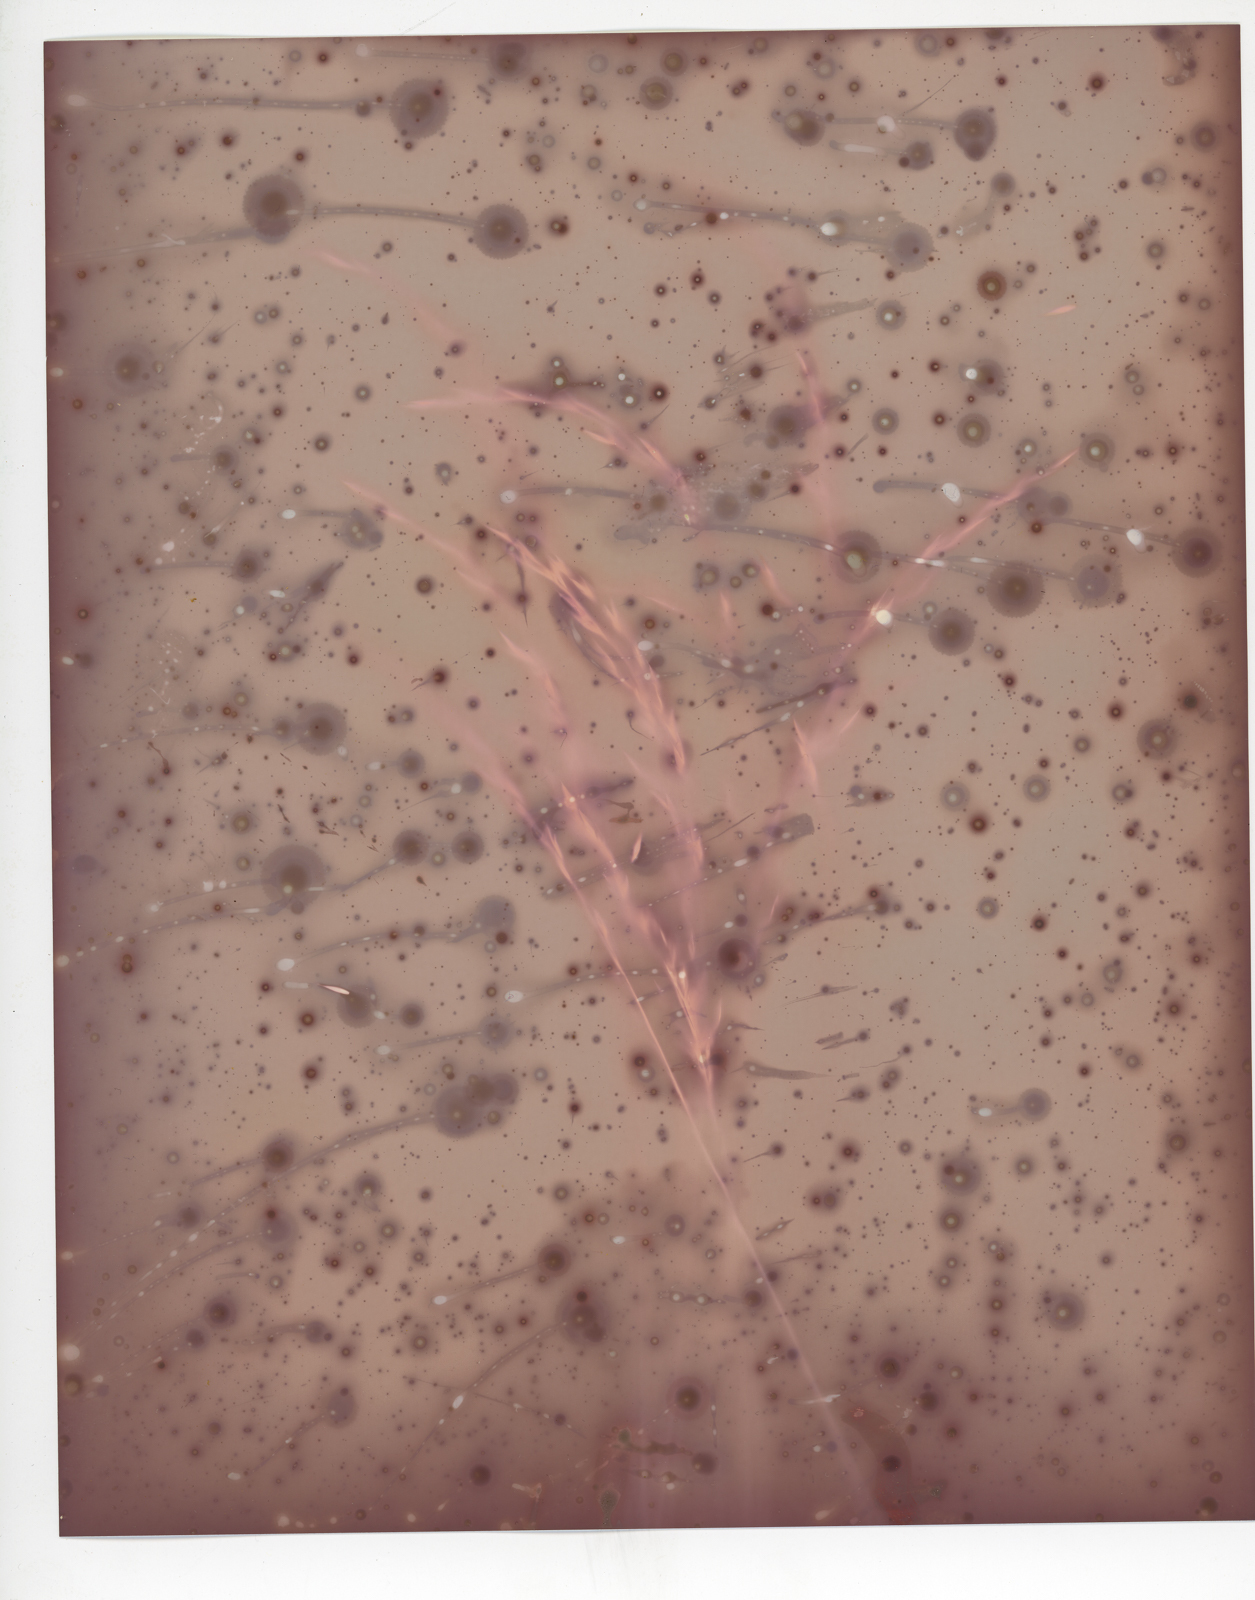 A lumen print of a plant exposed outside during a light summer rain.